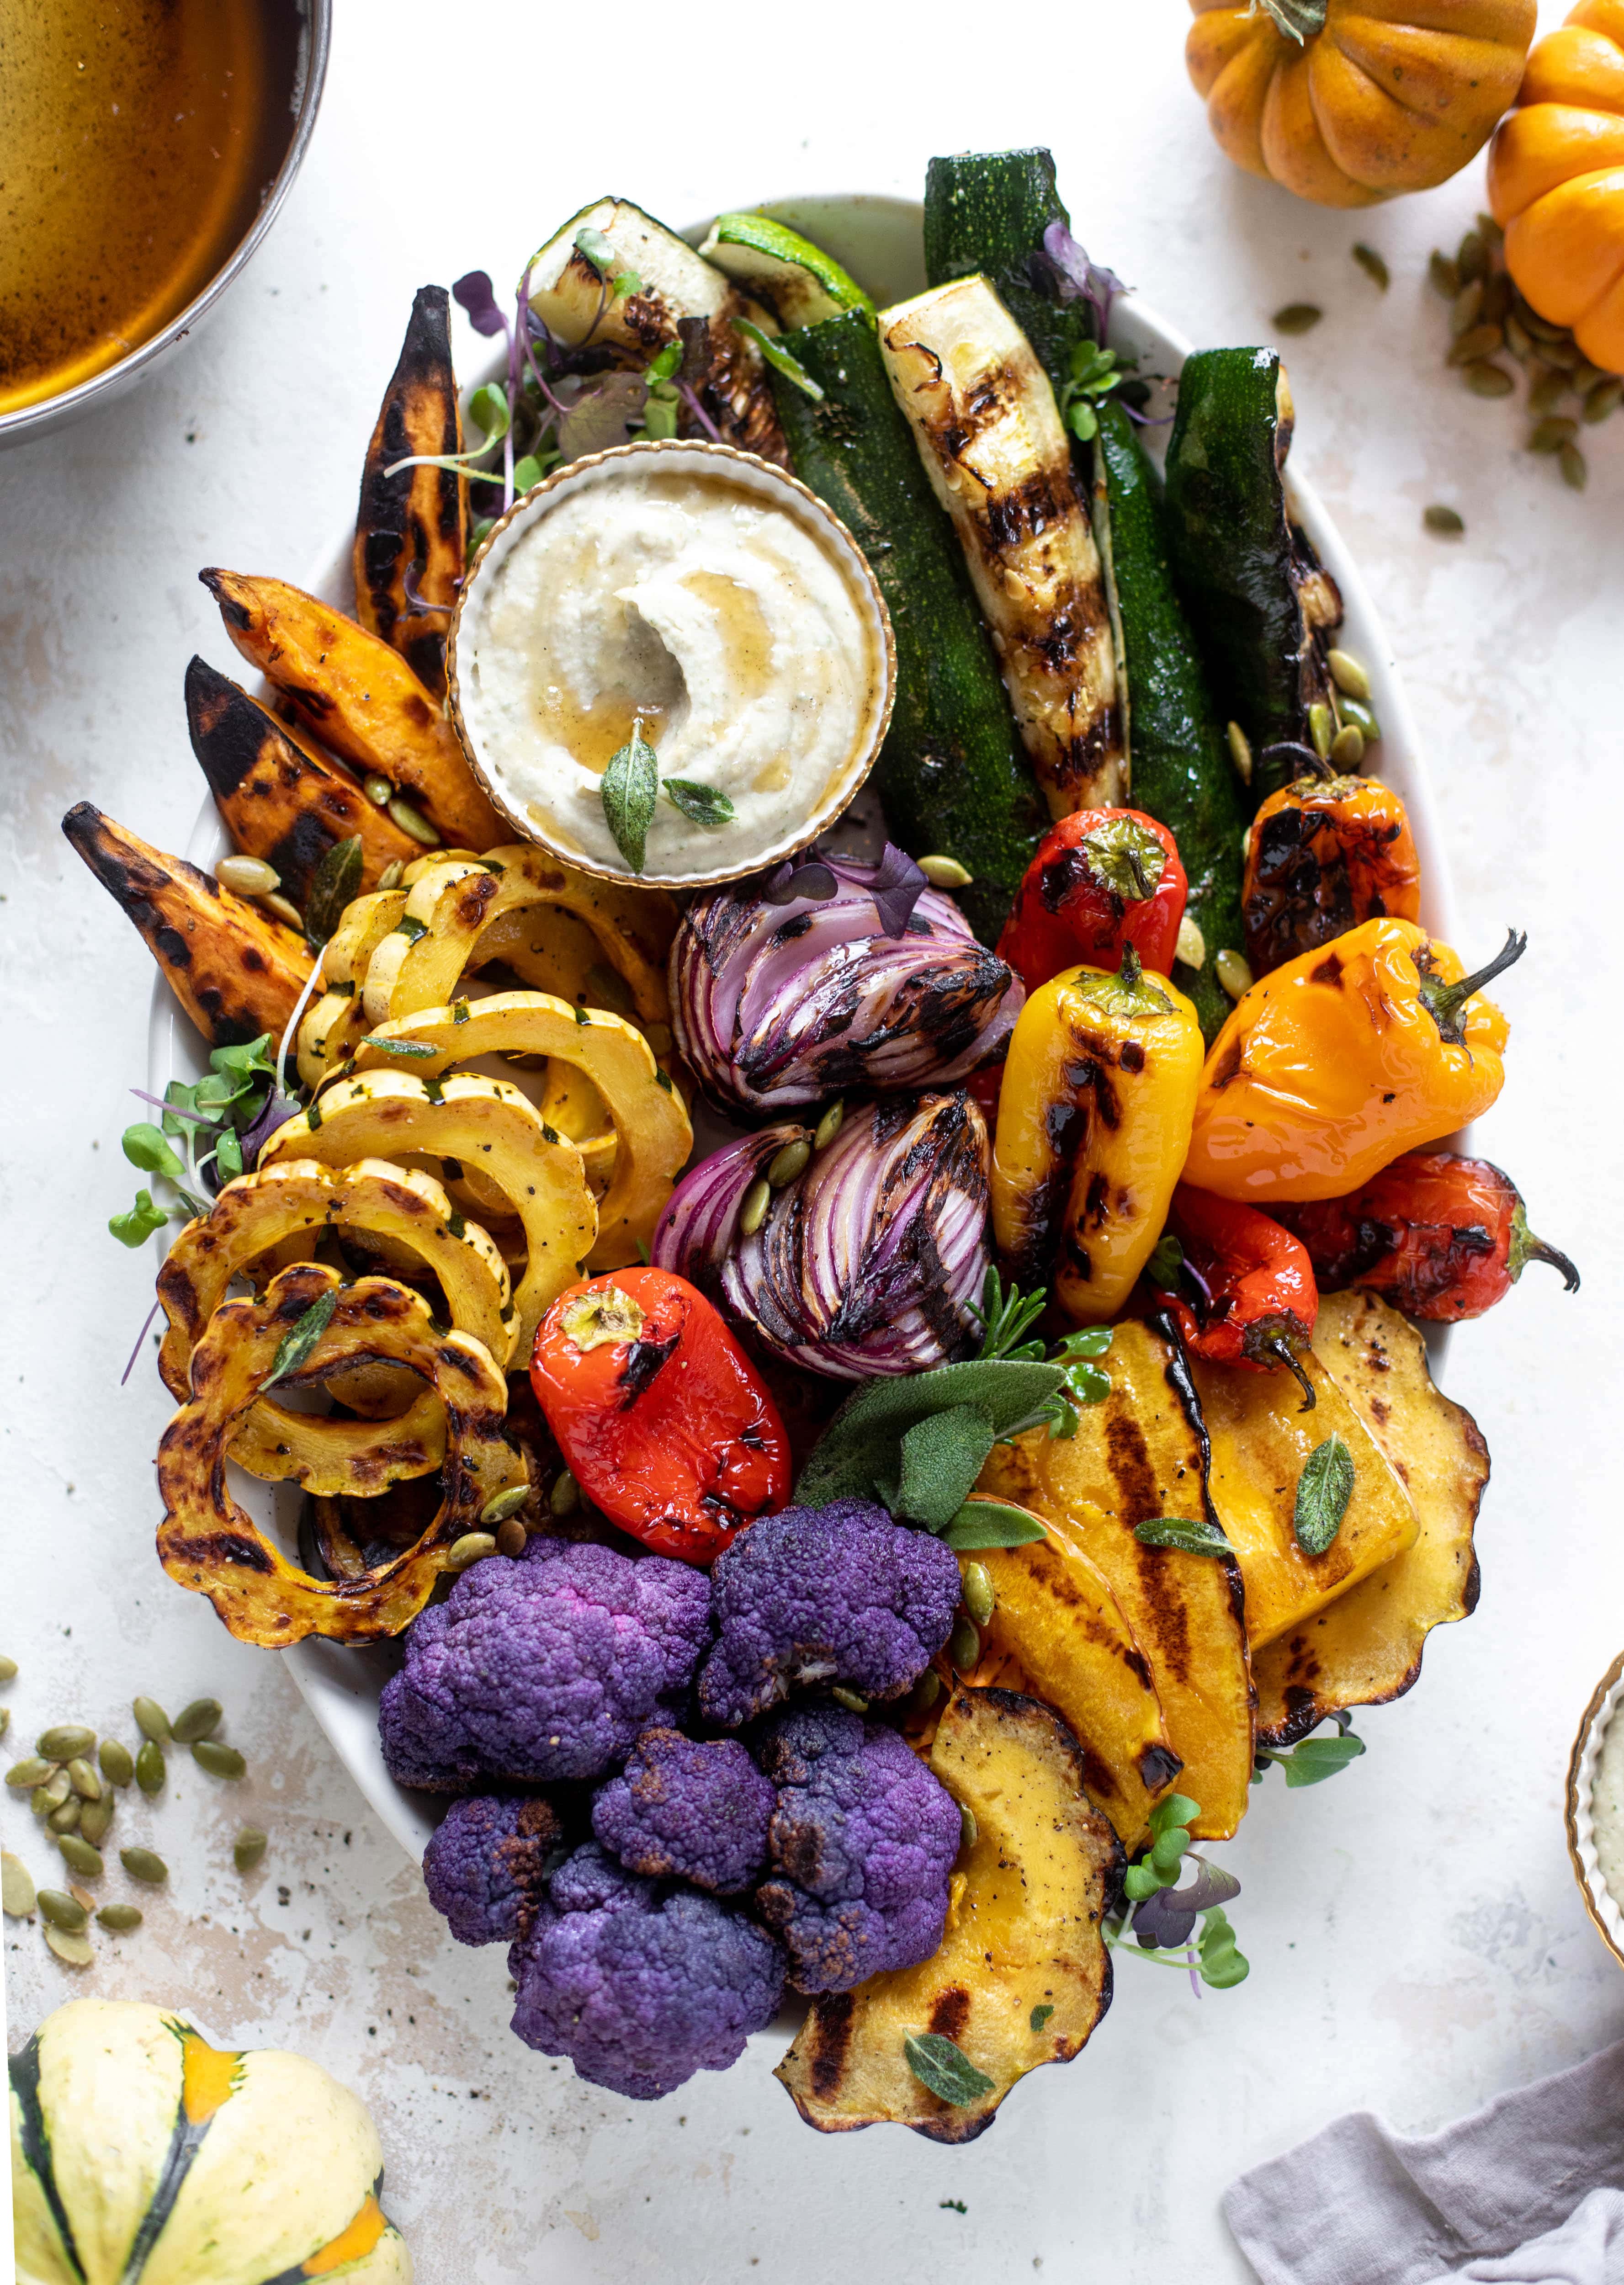 These grilled autumn vegetables make the best side dish or appetizer! Especially when served with the sage brown butter white bean dip. YUM.